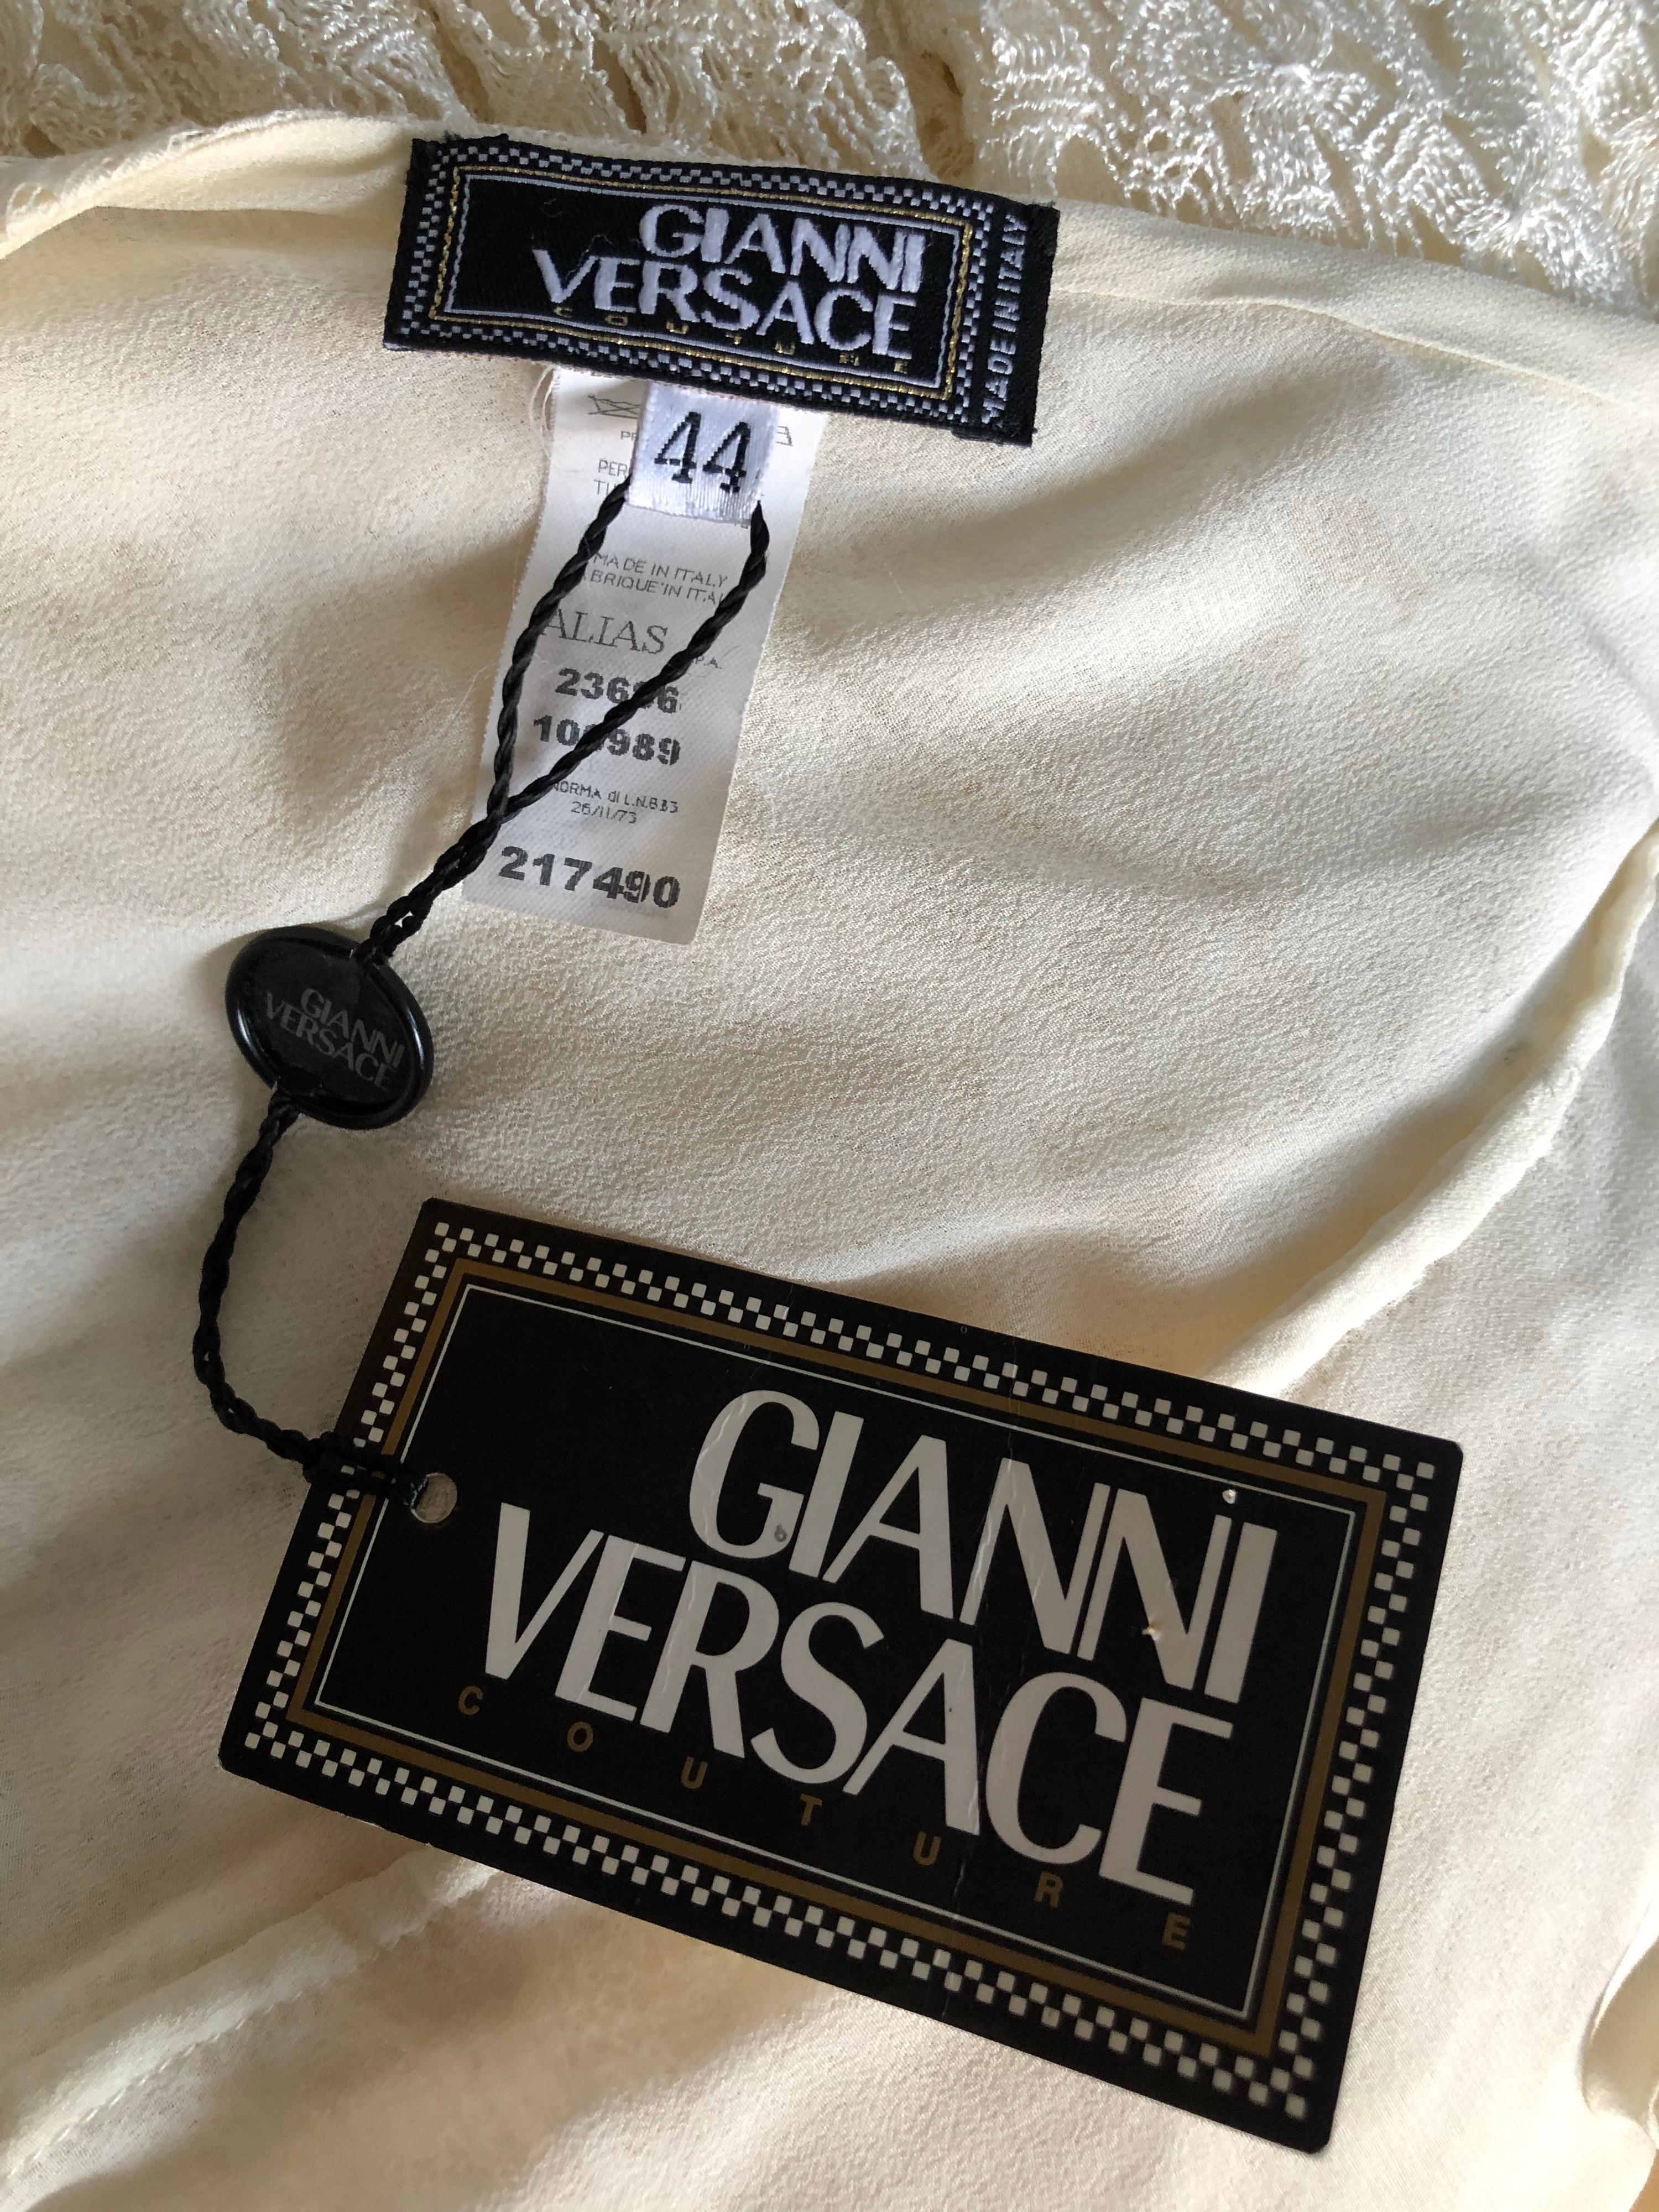 NWT Gianni Versace S/S 2002 Plunging Backless Semi Sheer Lace Ivory Dress Gown For Sale 2